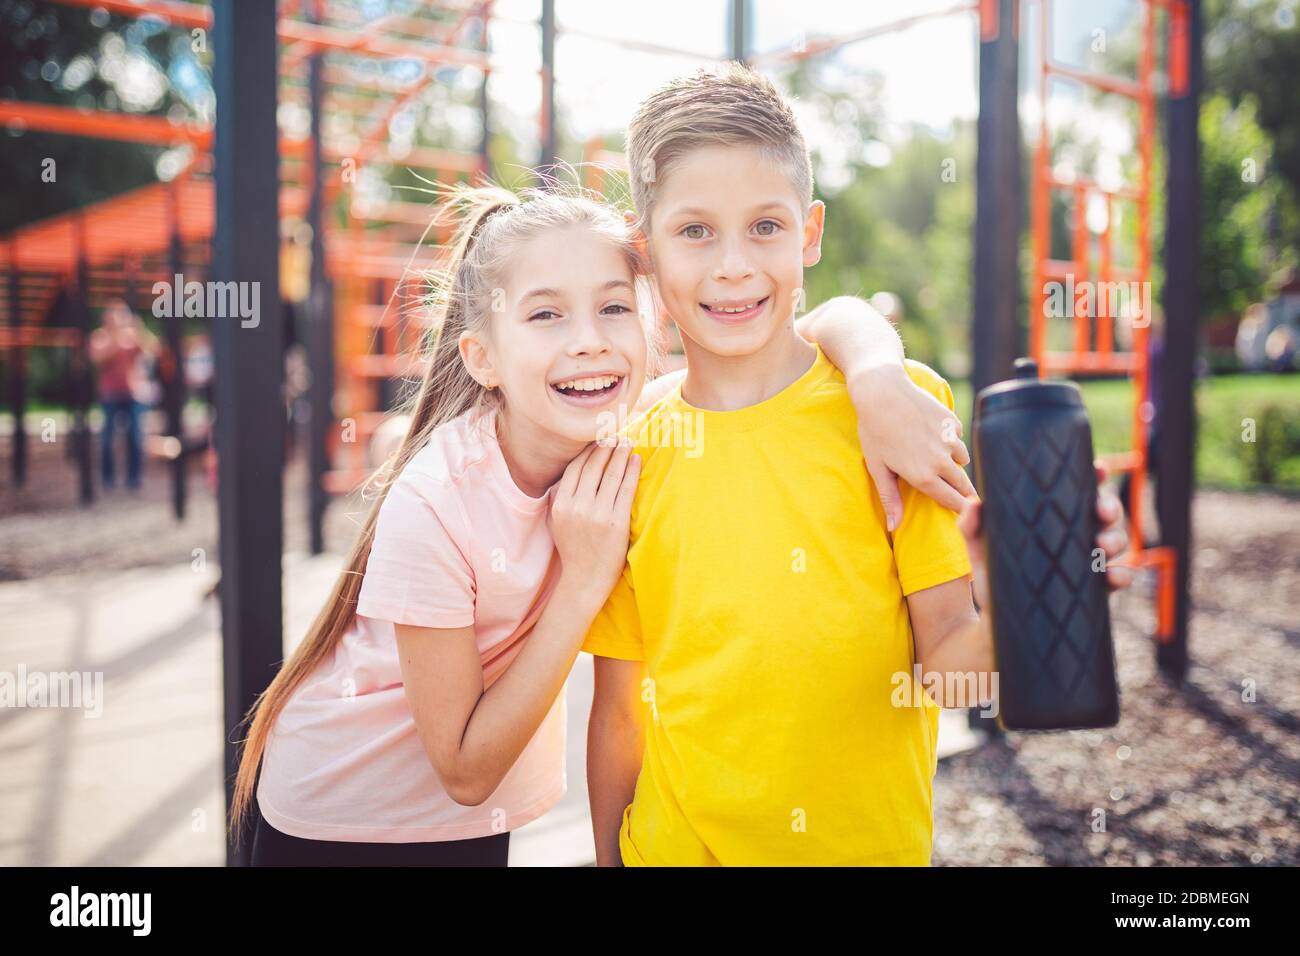 Teens children and sports theme. Two kids athletes twins rest and replenish their thirst during workout outdoor gym workout in sunny summer weather. S Stock Photo